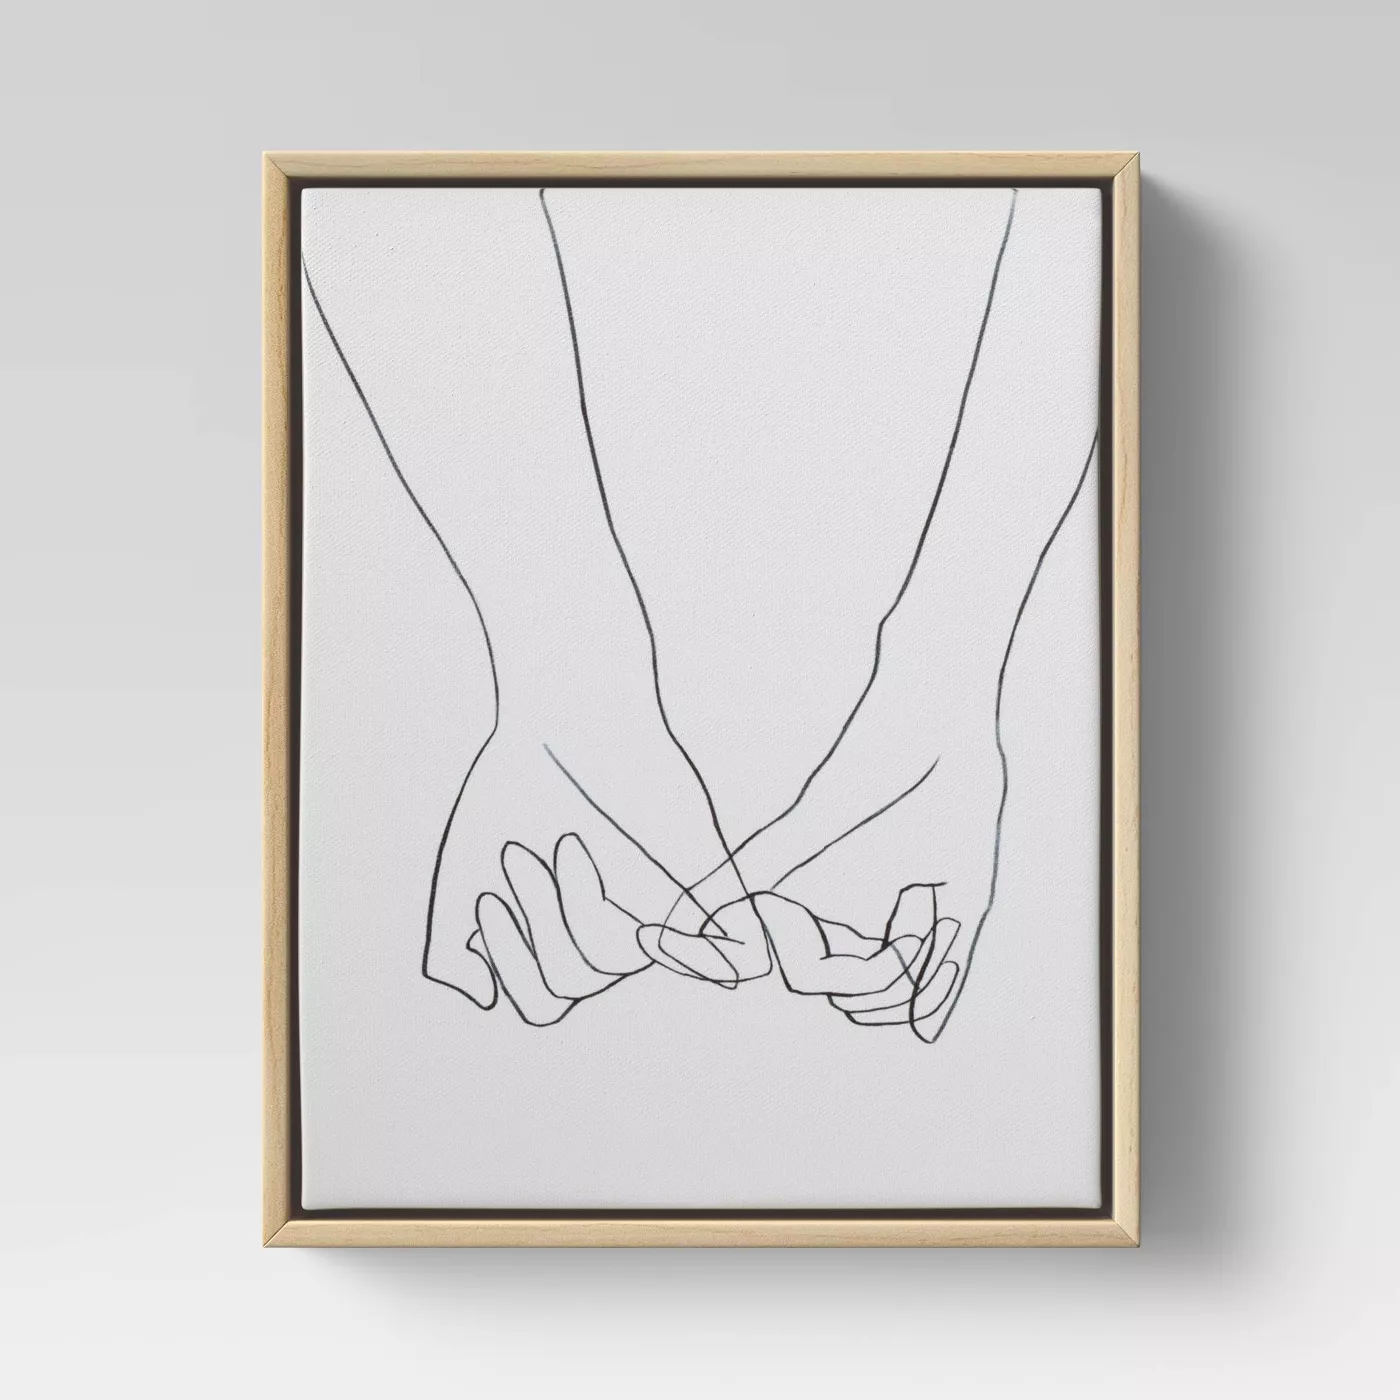 Holding Hands Framed Wall Canvas Black/White - Opalhouse™ - image 1 of 3